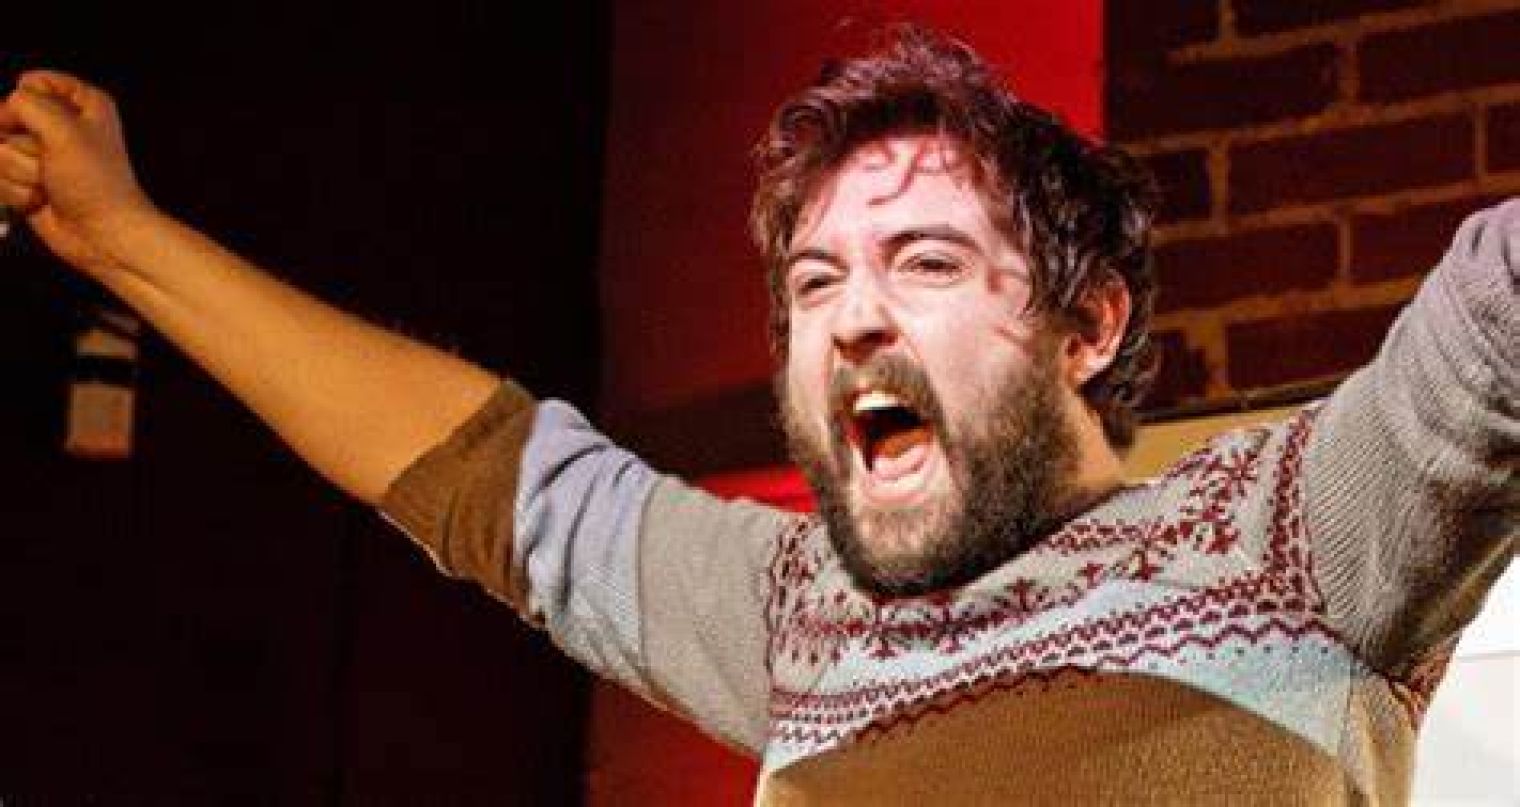 Catch Nick Helm's hit comedy horror show 'I Think You Stink' on all this week at the Soho Theatre